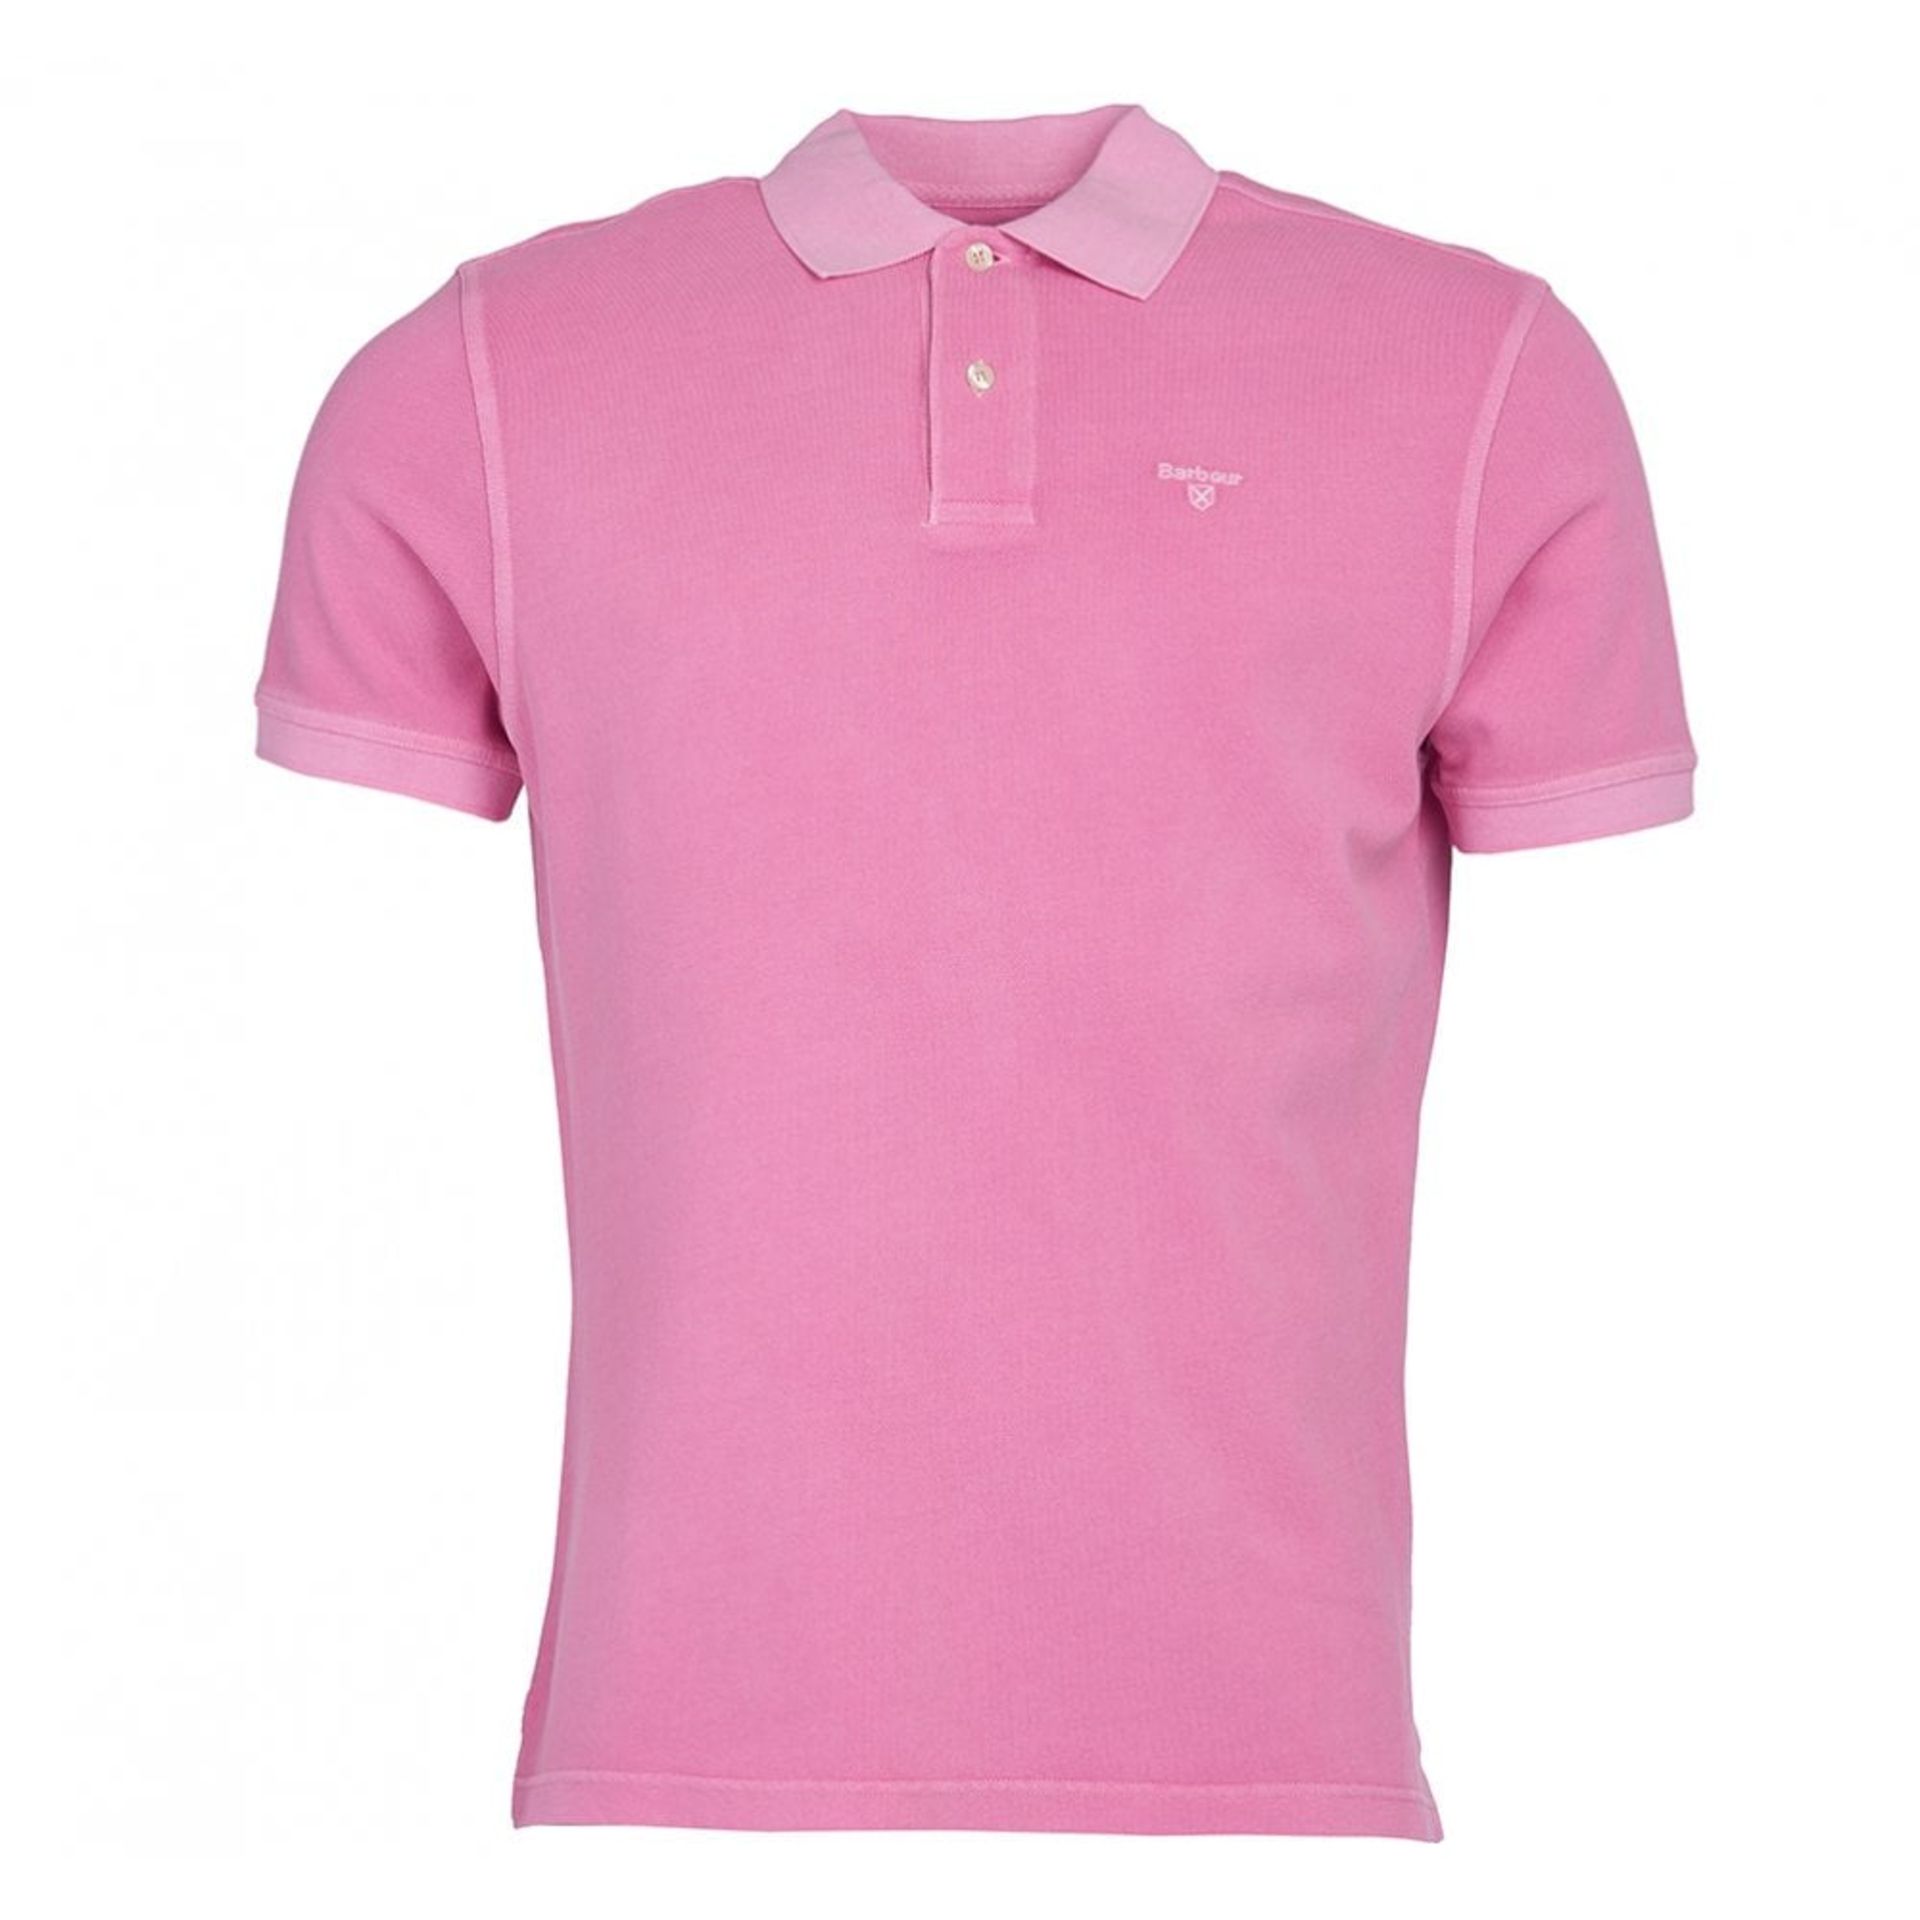 BRAND NEW BARBOUR WASHED SPORT POLO TOP MAUVE SIZE XXL (9718) RRP £50